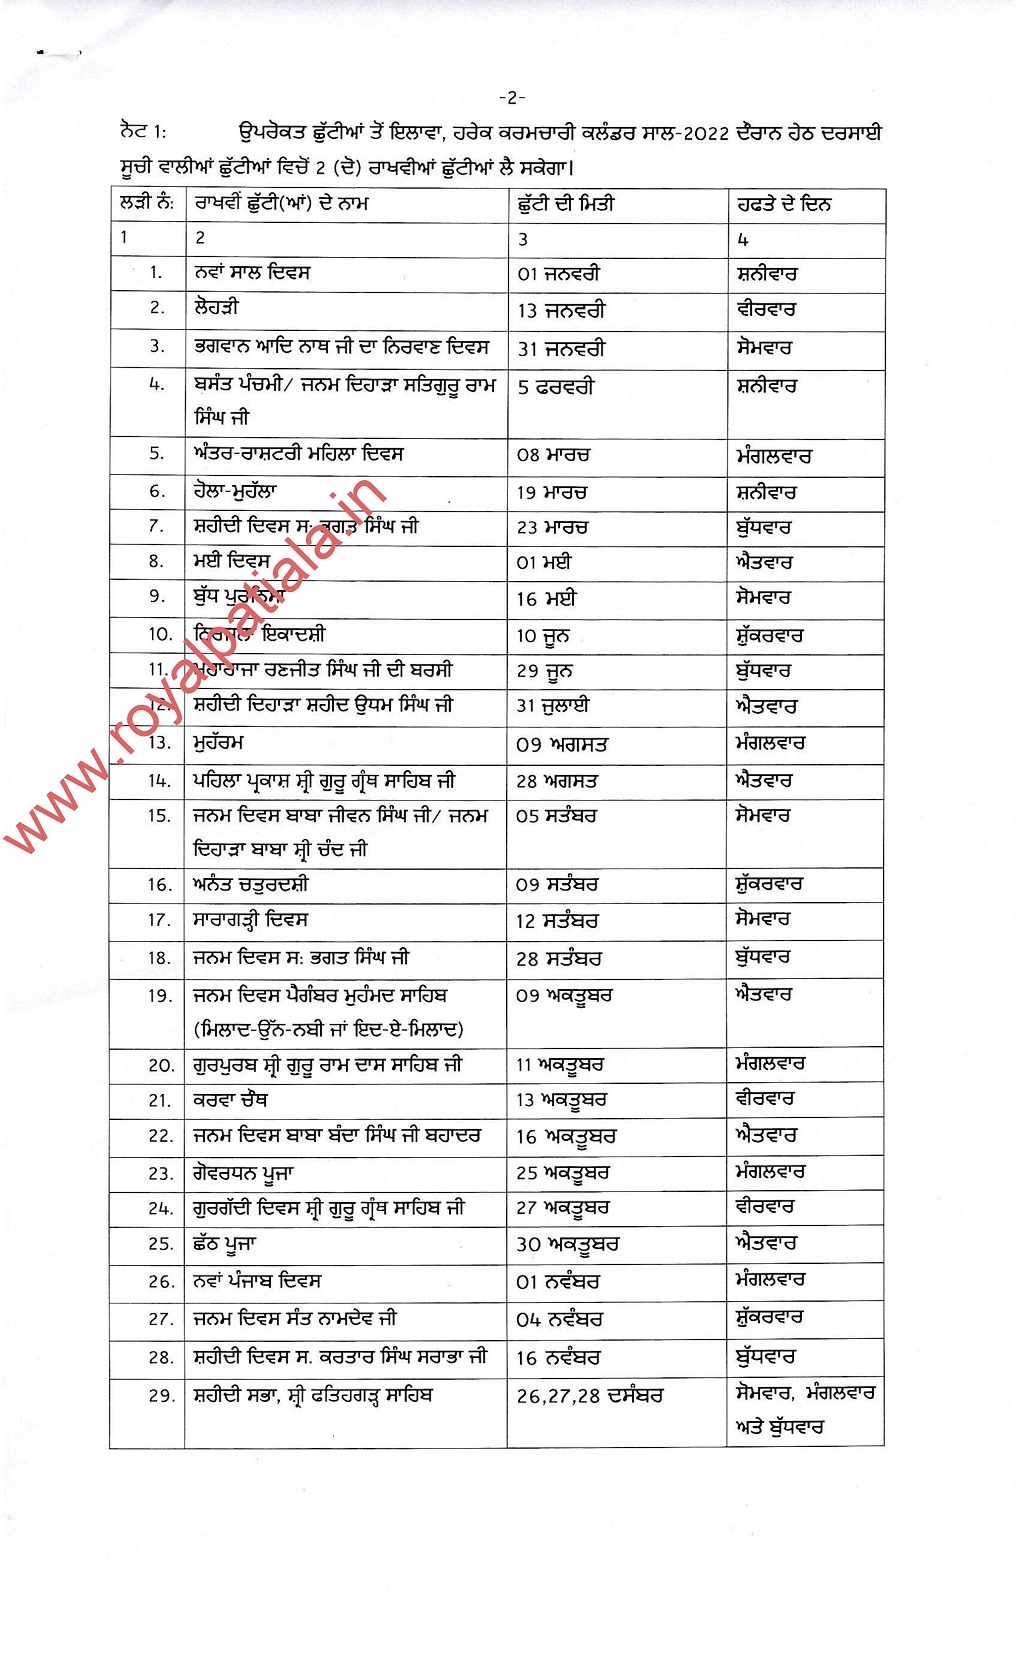 Punjab government releases 2022 gazetted holidays list Royal Patiala